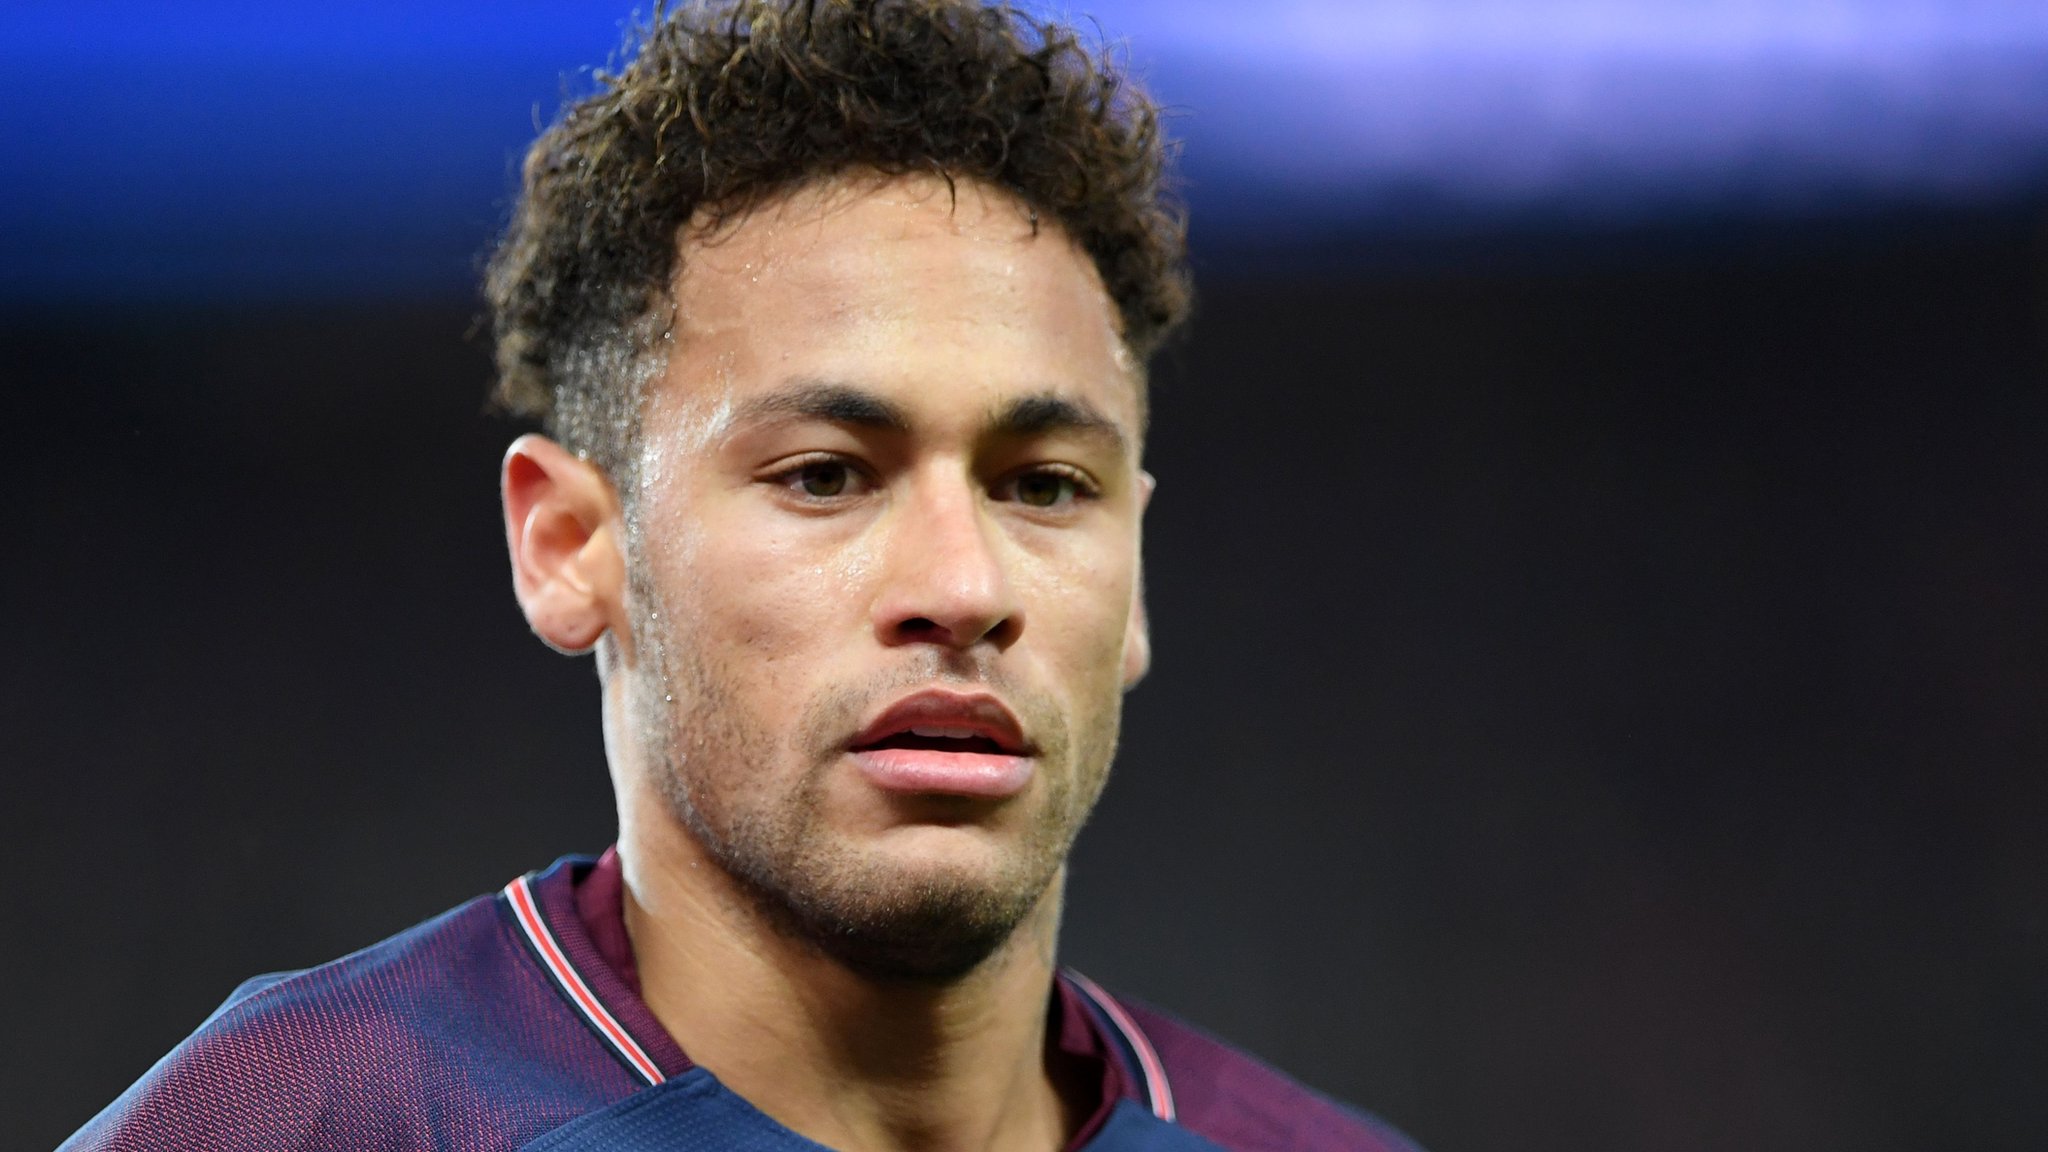 Neymar wants to leave PSG for Real Madrid - gossip